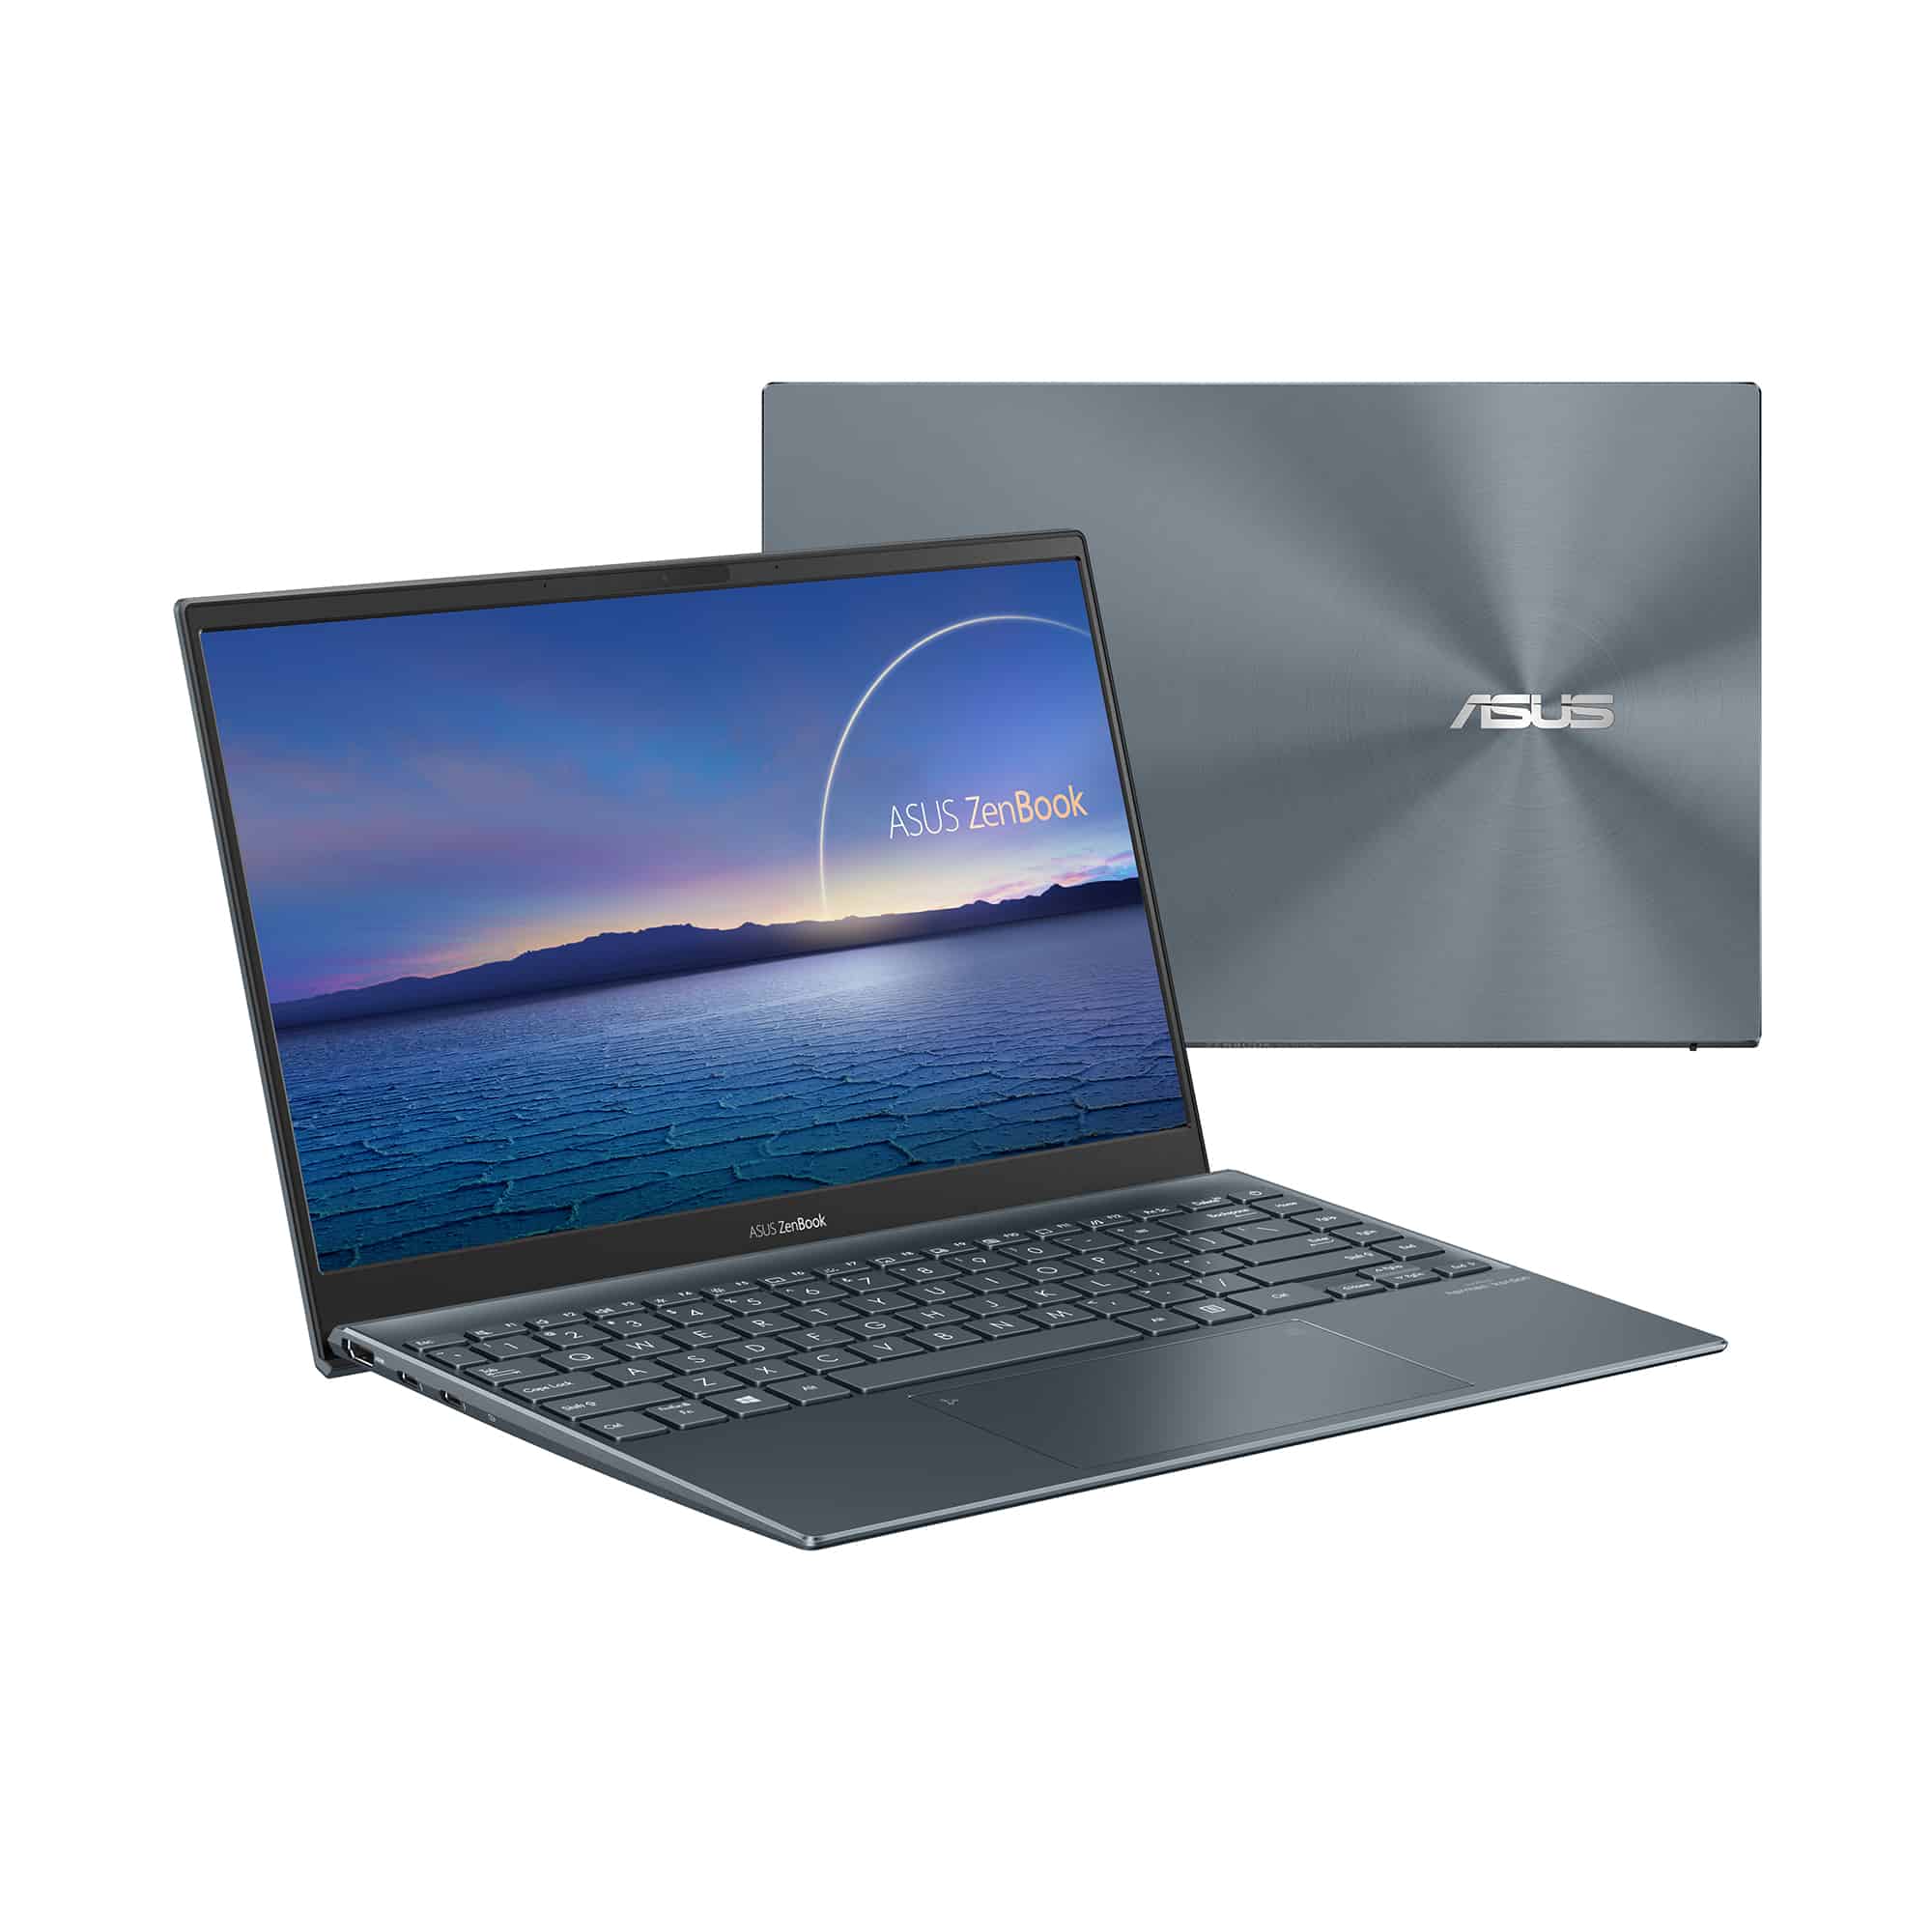 ASUS Announces All-New ZenBook 13 OLED